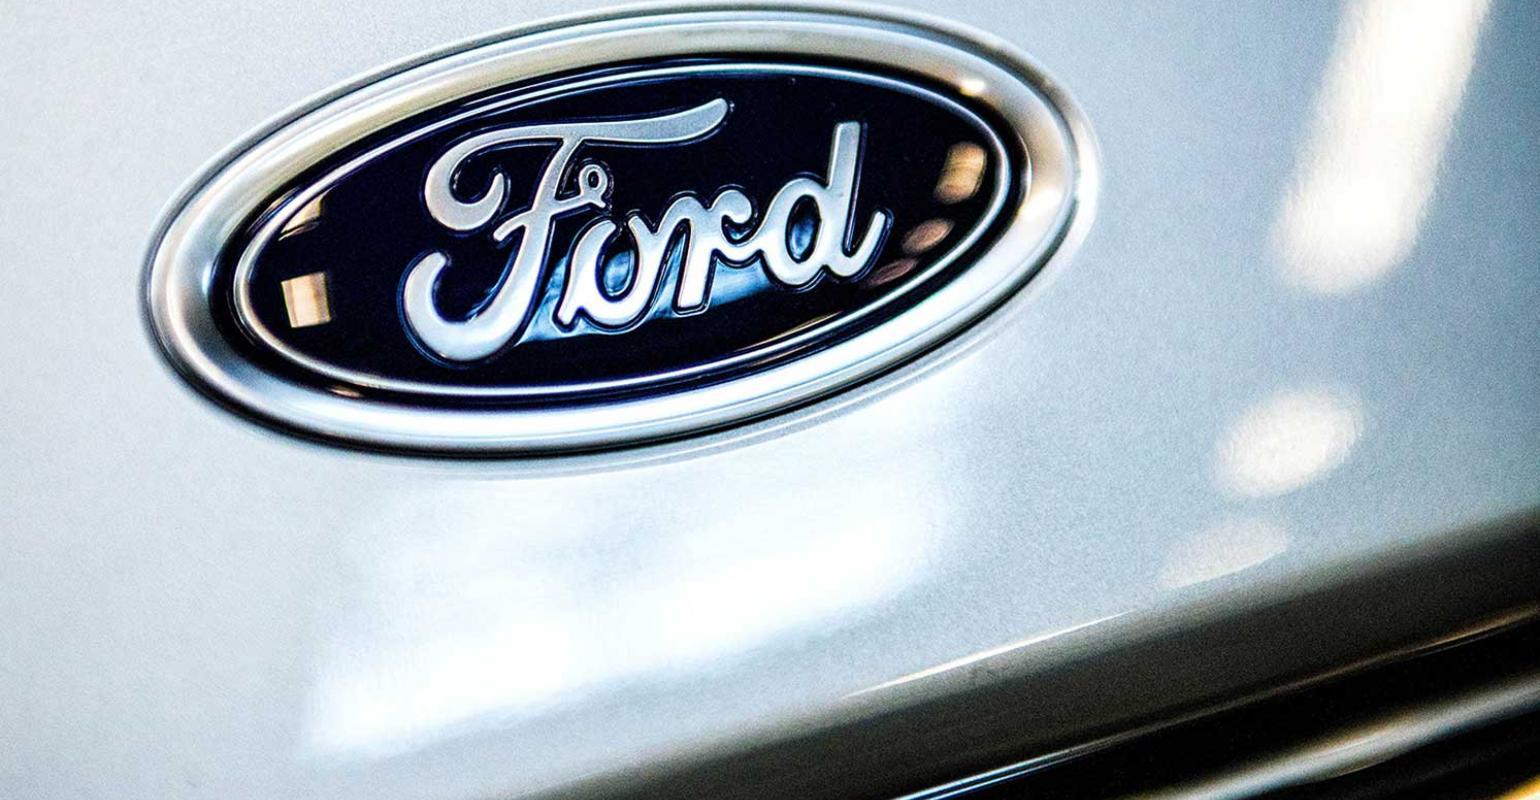 White Ford Logo - Ford Cancels Plans to Import SUV Model from China in Wake of Tariffs ...